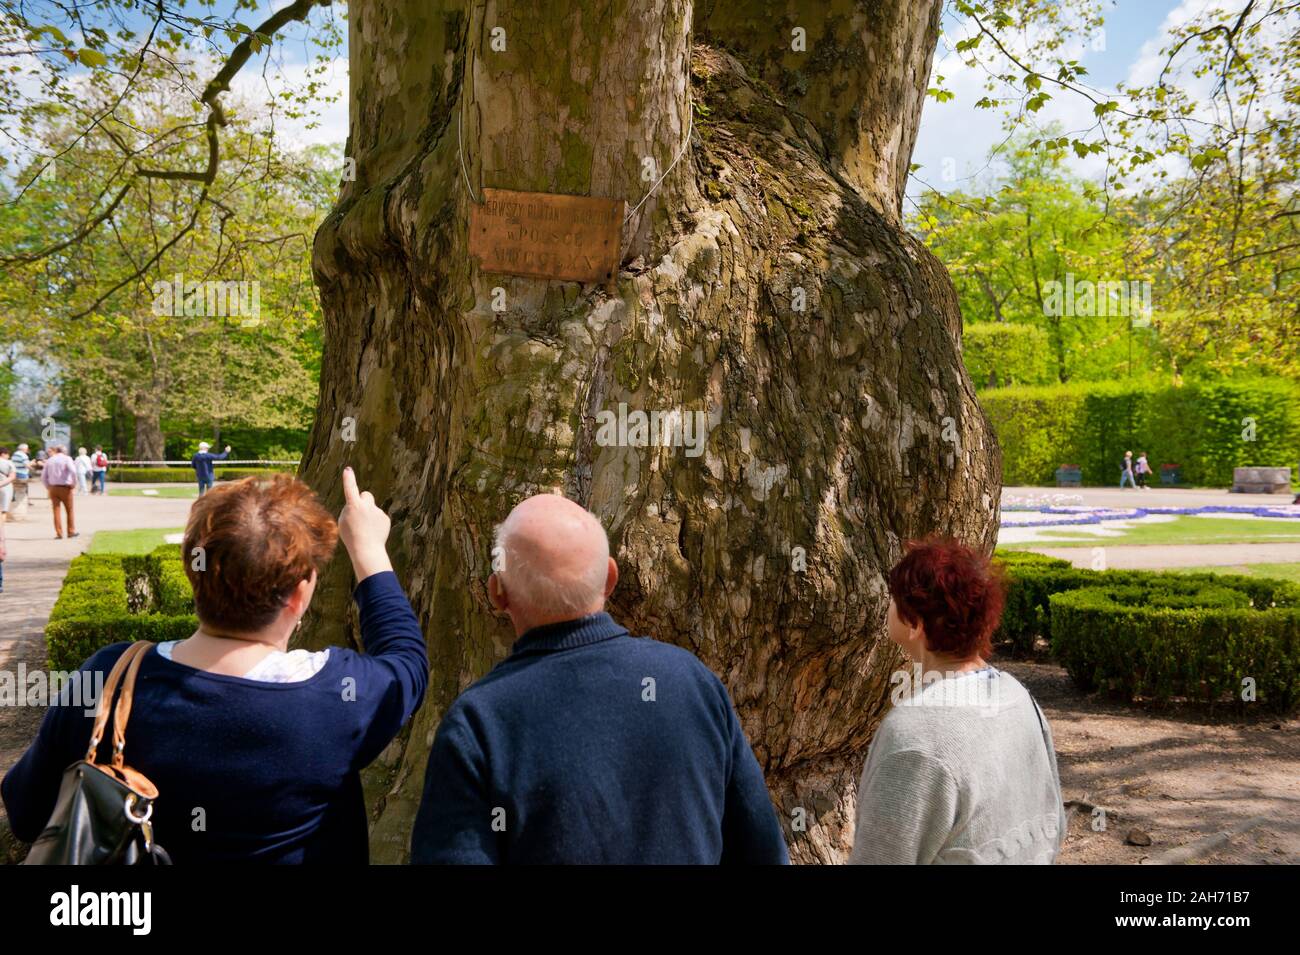 Visitors watching Platanus acerifolia huge old tree plaque in the ornamental baroque garden next to Radziwiłł's Palace in Nieborów in Poland, Europe. Stock Photo